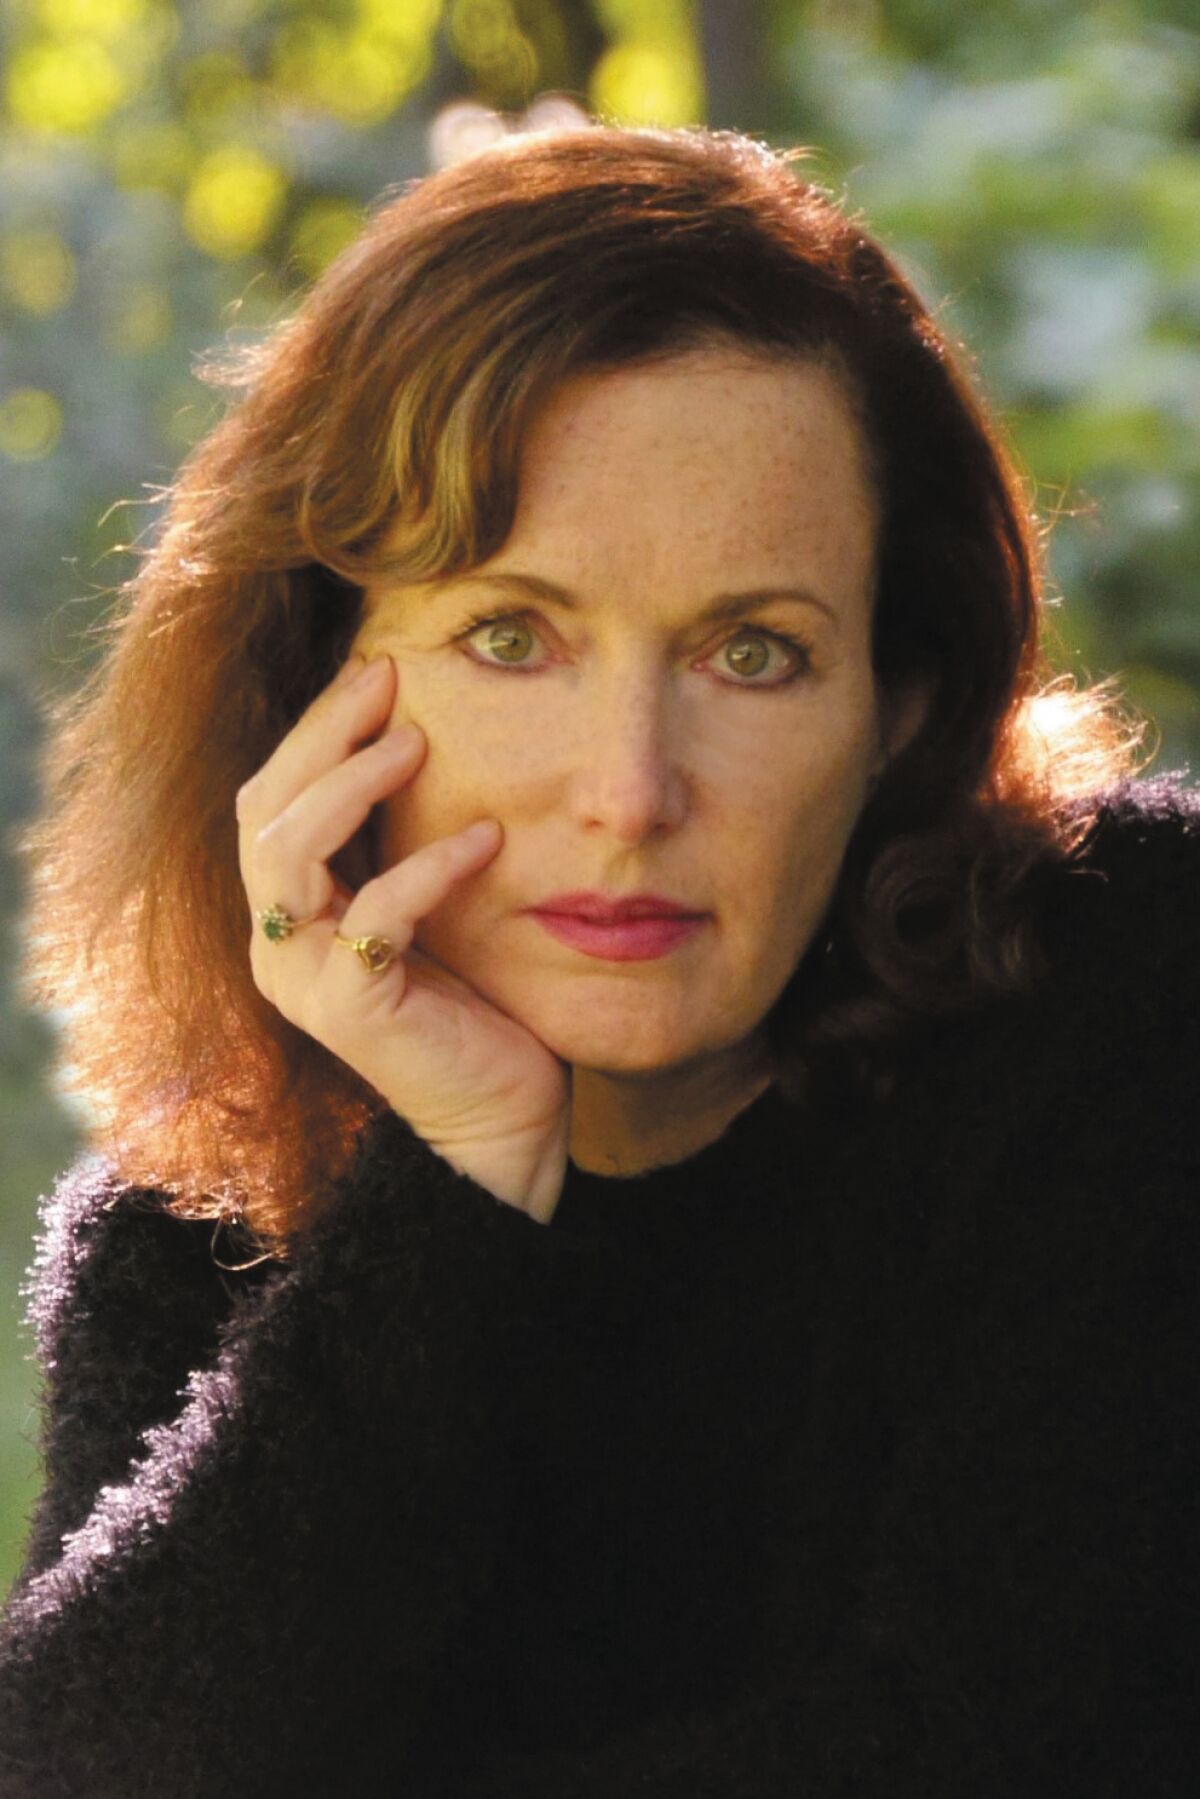 Author Alison Gaylin poses with her hand under her chin.